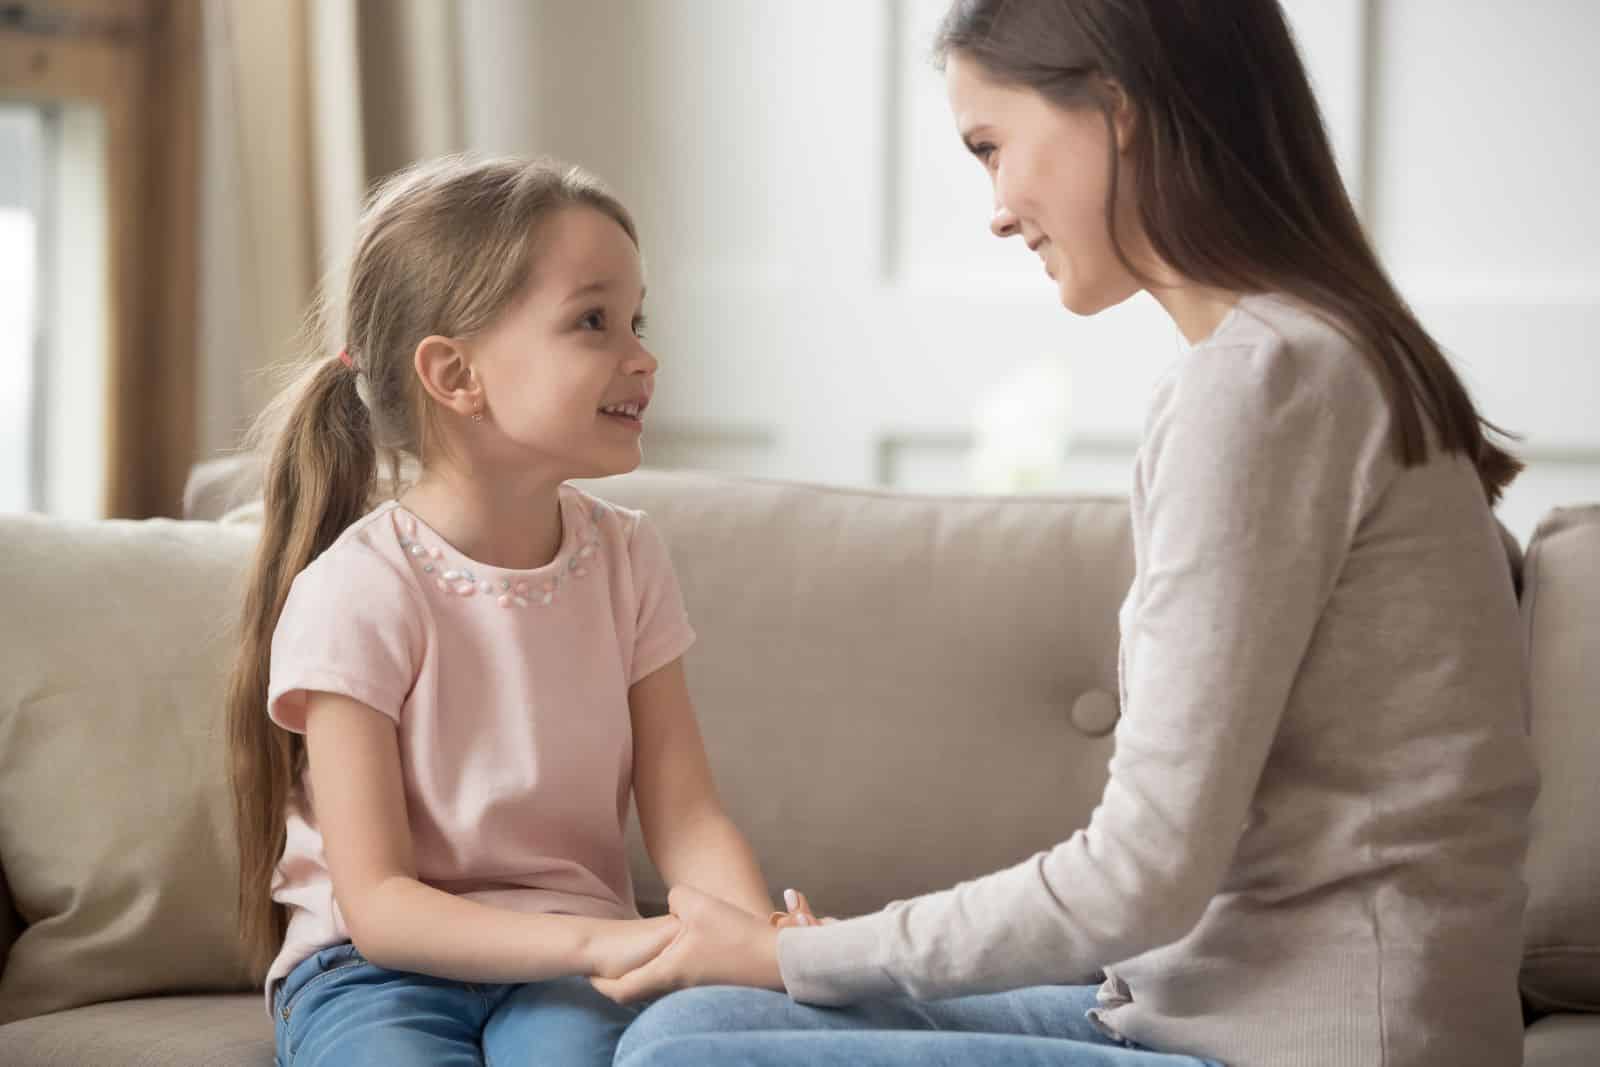 <p class="wp-caption-text">Image Credit: Shutterstock / fizkes</p>  <p><span>Create an environment of psychological safety within your family where all members feel comfortable expressing their thoughts, feelings, and concerns without fear of judgment or reprisal.</span></p>